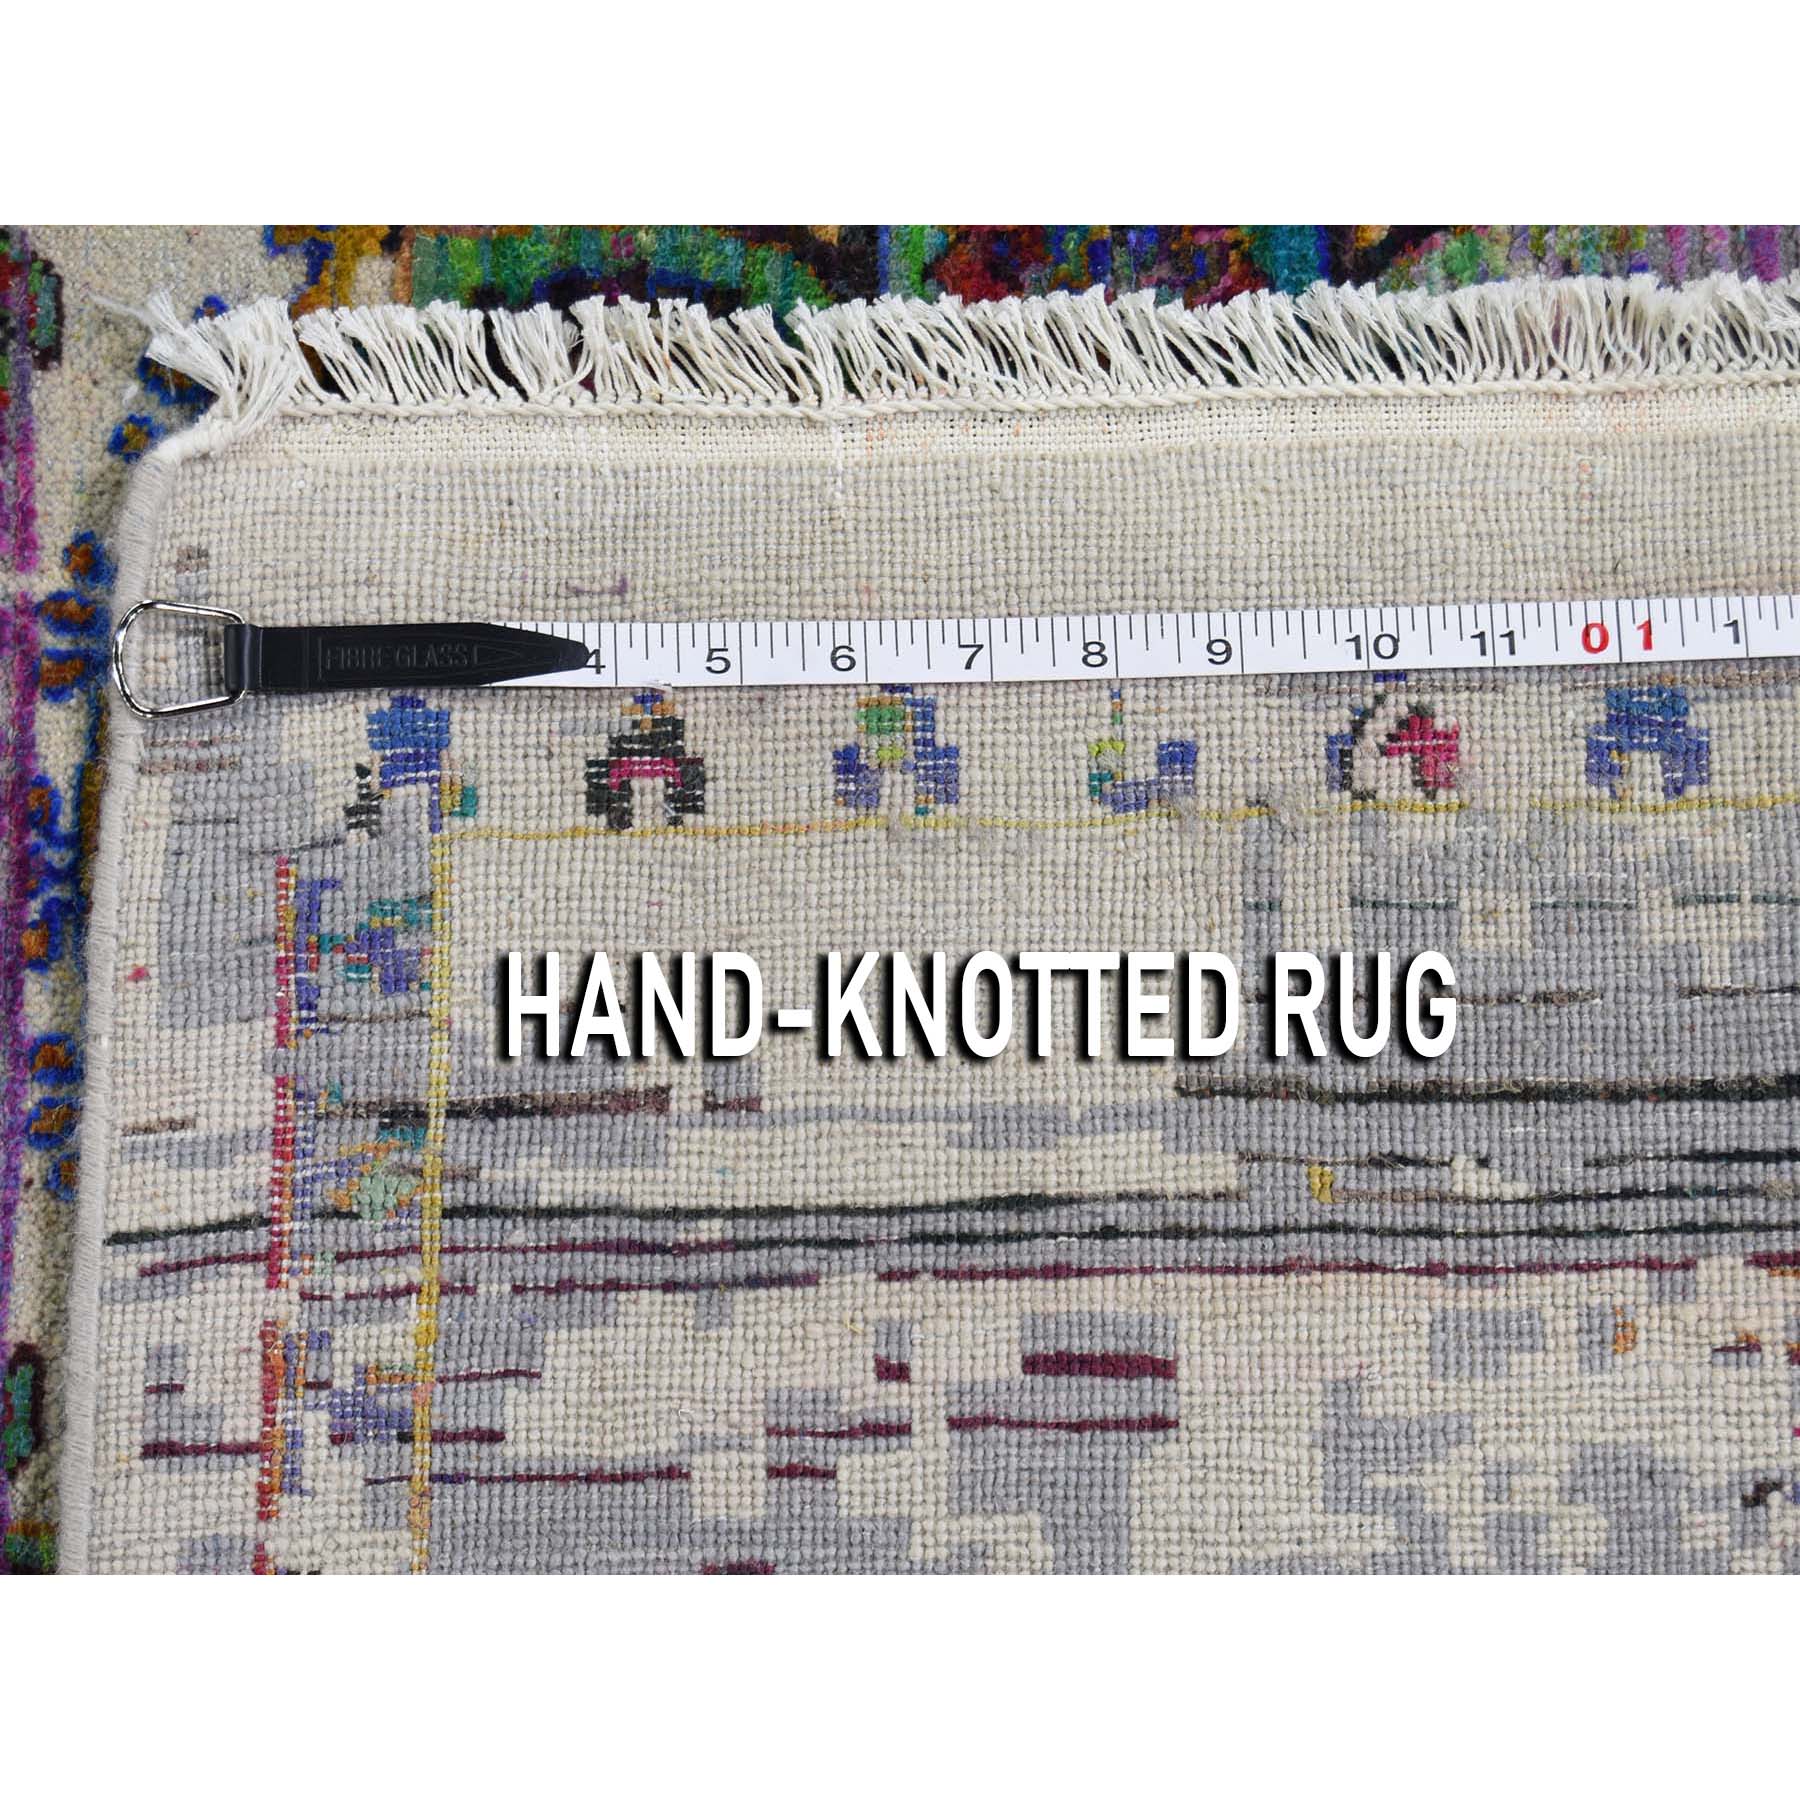 9-10 x14-3  ERASED ROSSETS, Colorful Sari Silk With Textured Wool Hand-Knotted Oriental Rug 